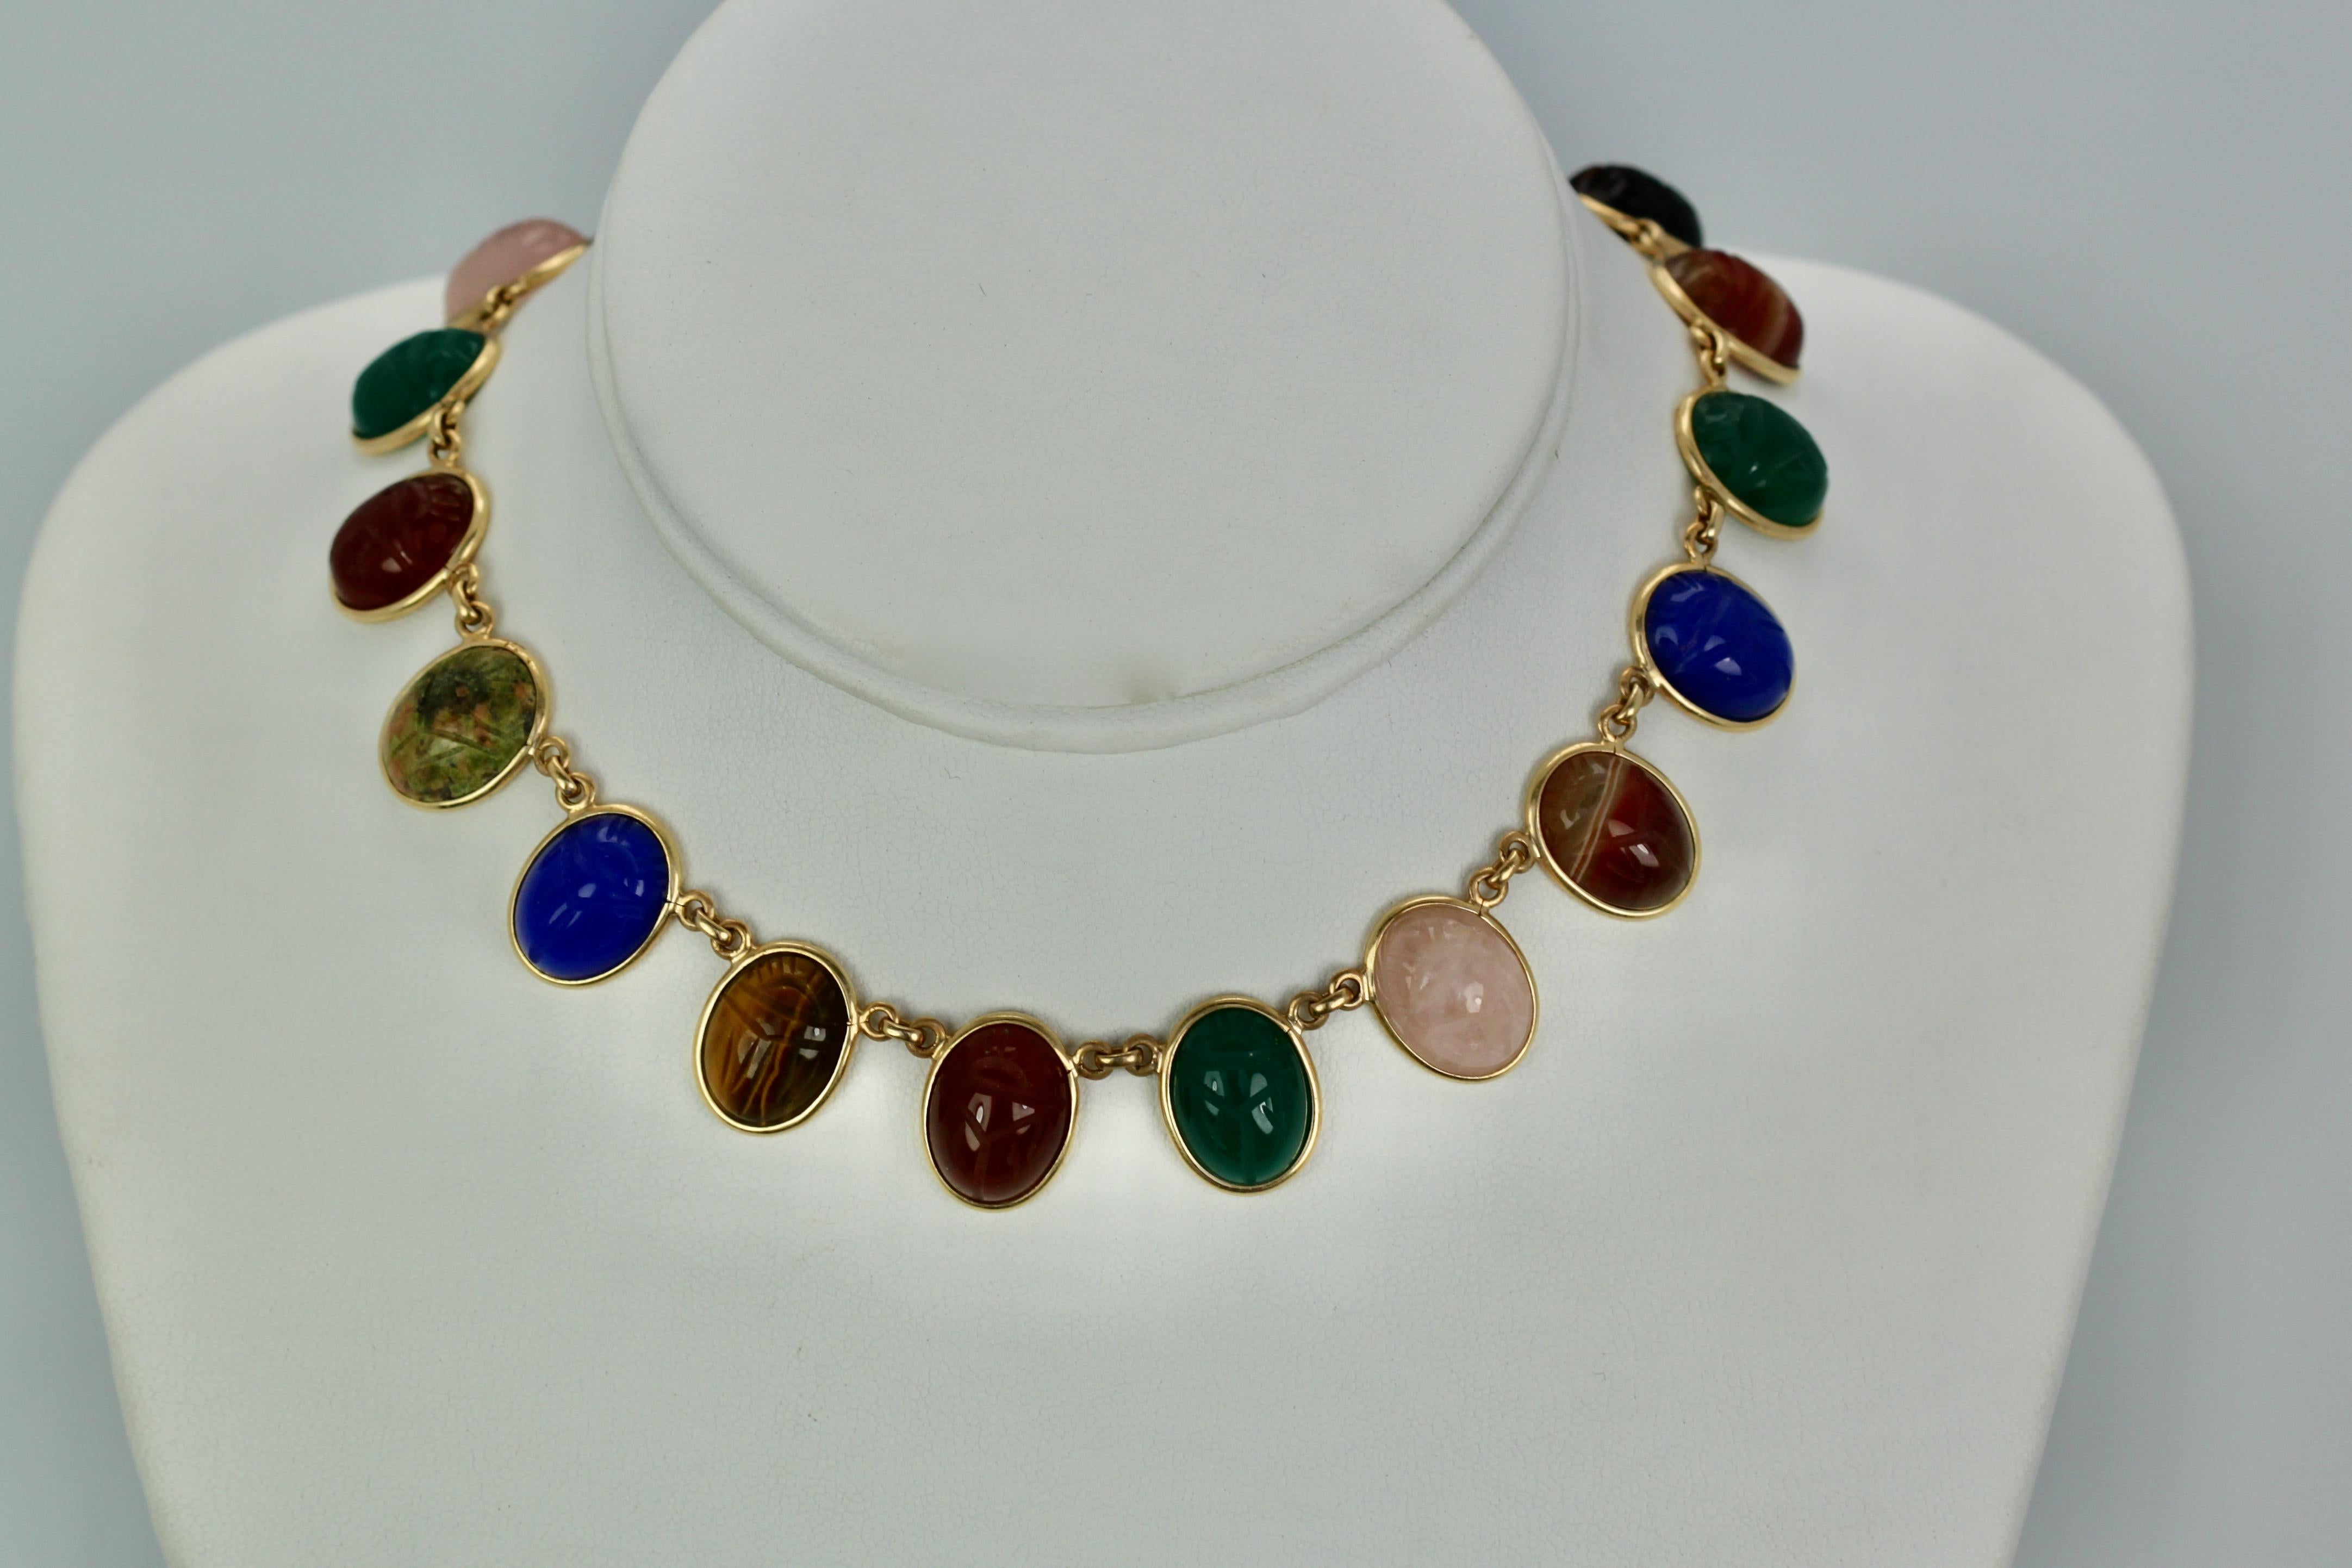 This multi stone scarab necklace is 13.5 inches long and comes with matching 2 scarab bracelets.  When both bracelets are added to this necklace it is 27.75 inches long.  The bracelets measure 7.25 inches if you added one bracelet to the necklace